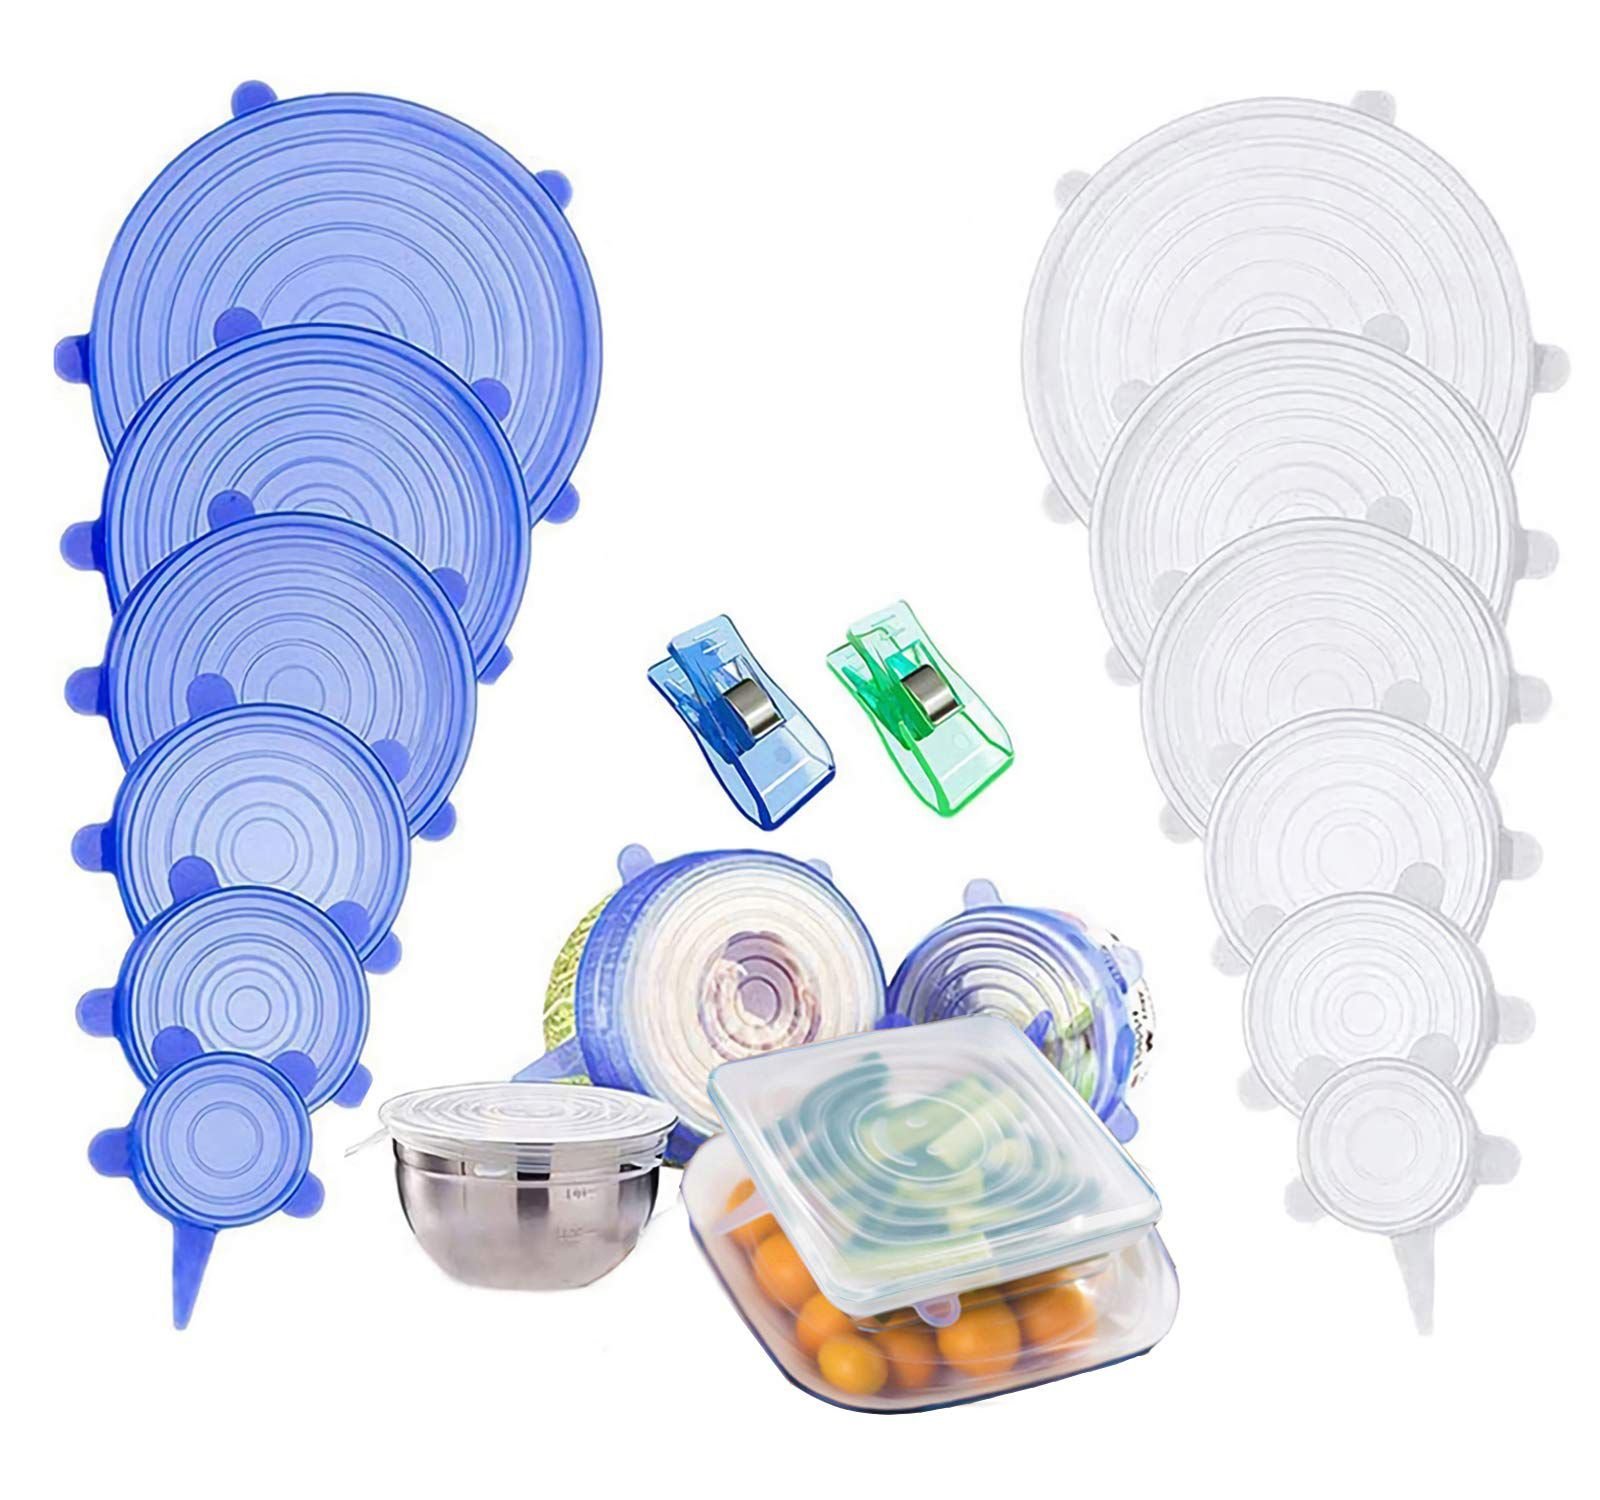 Ez 6 pc Resueable Silicone Cover For Food